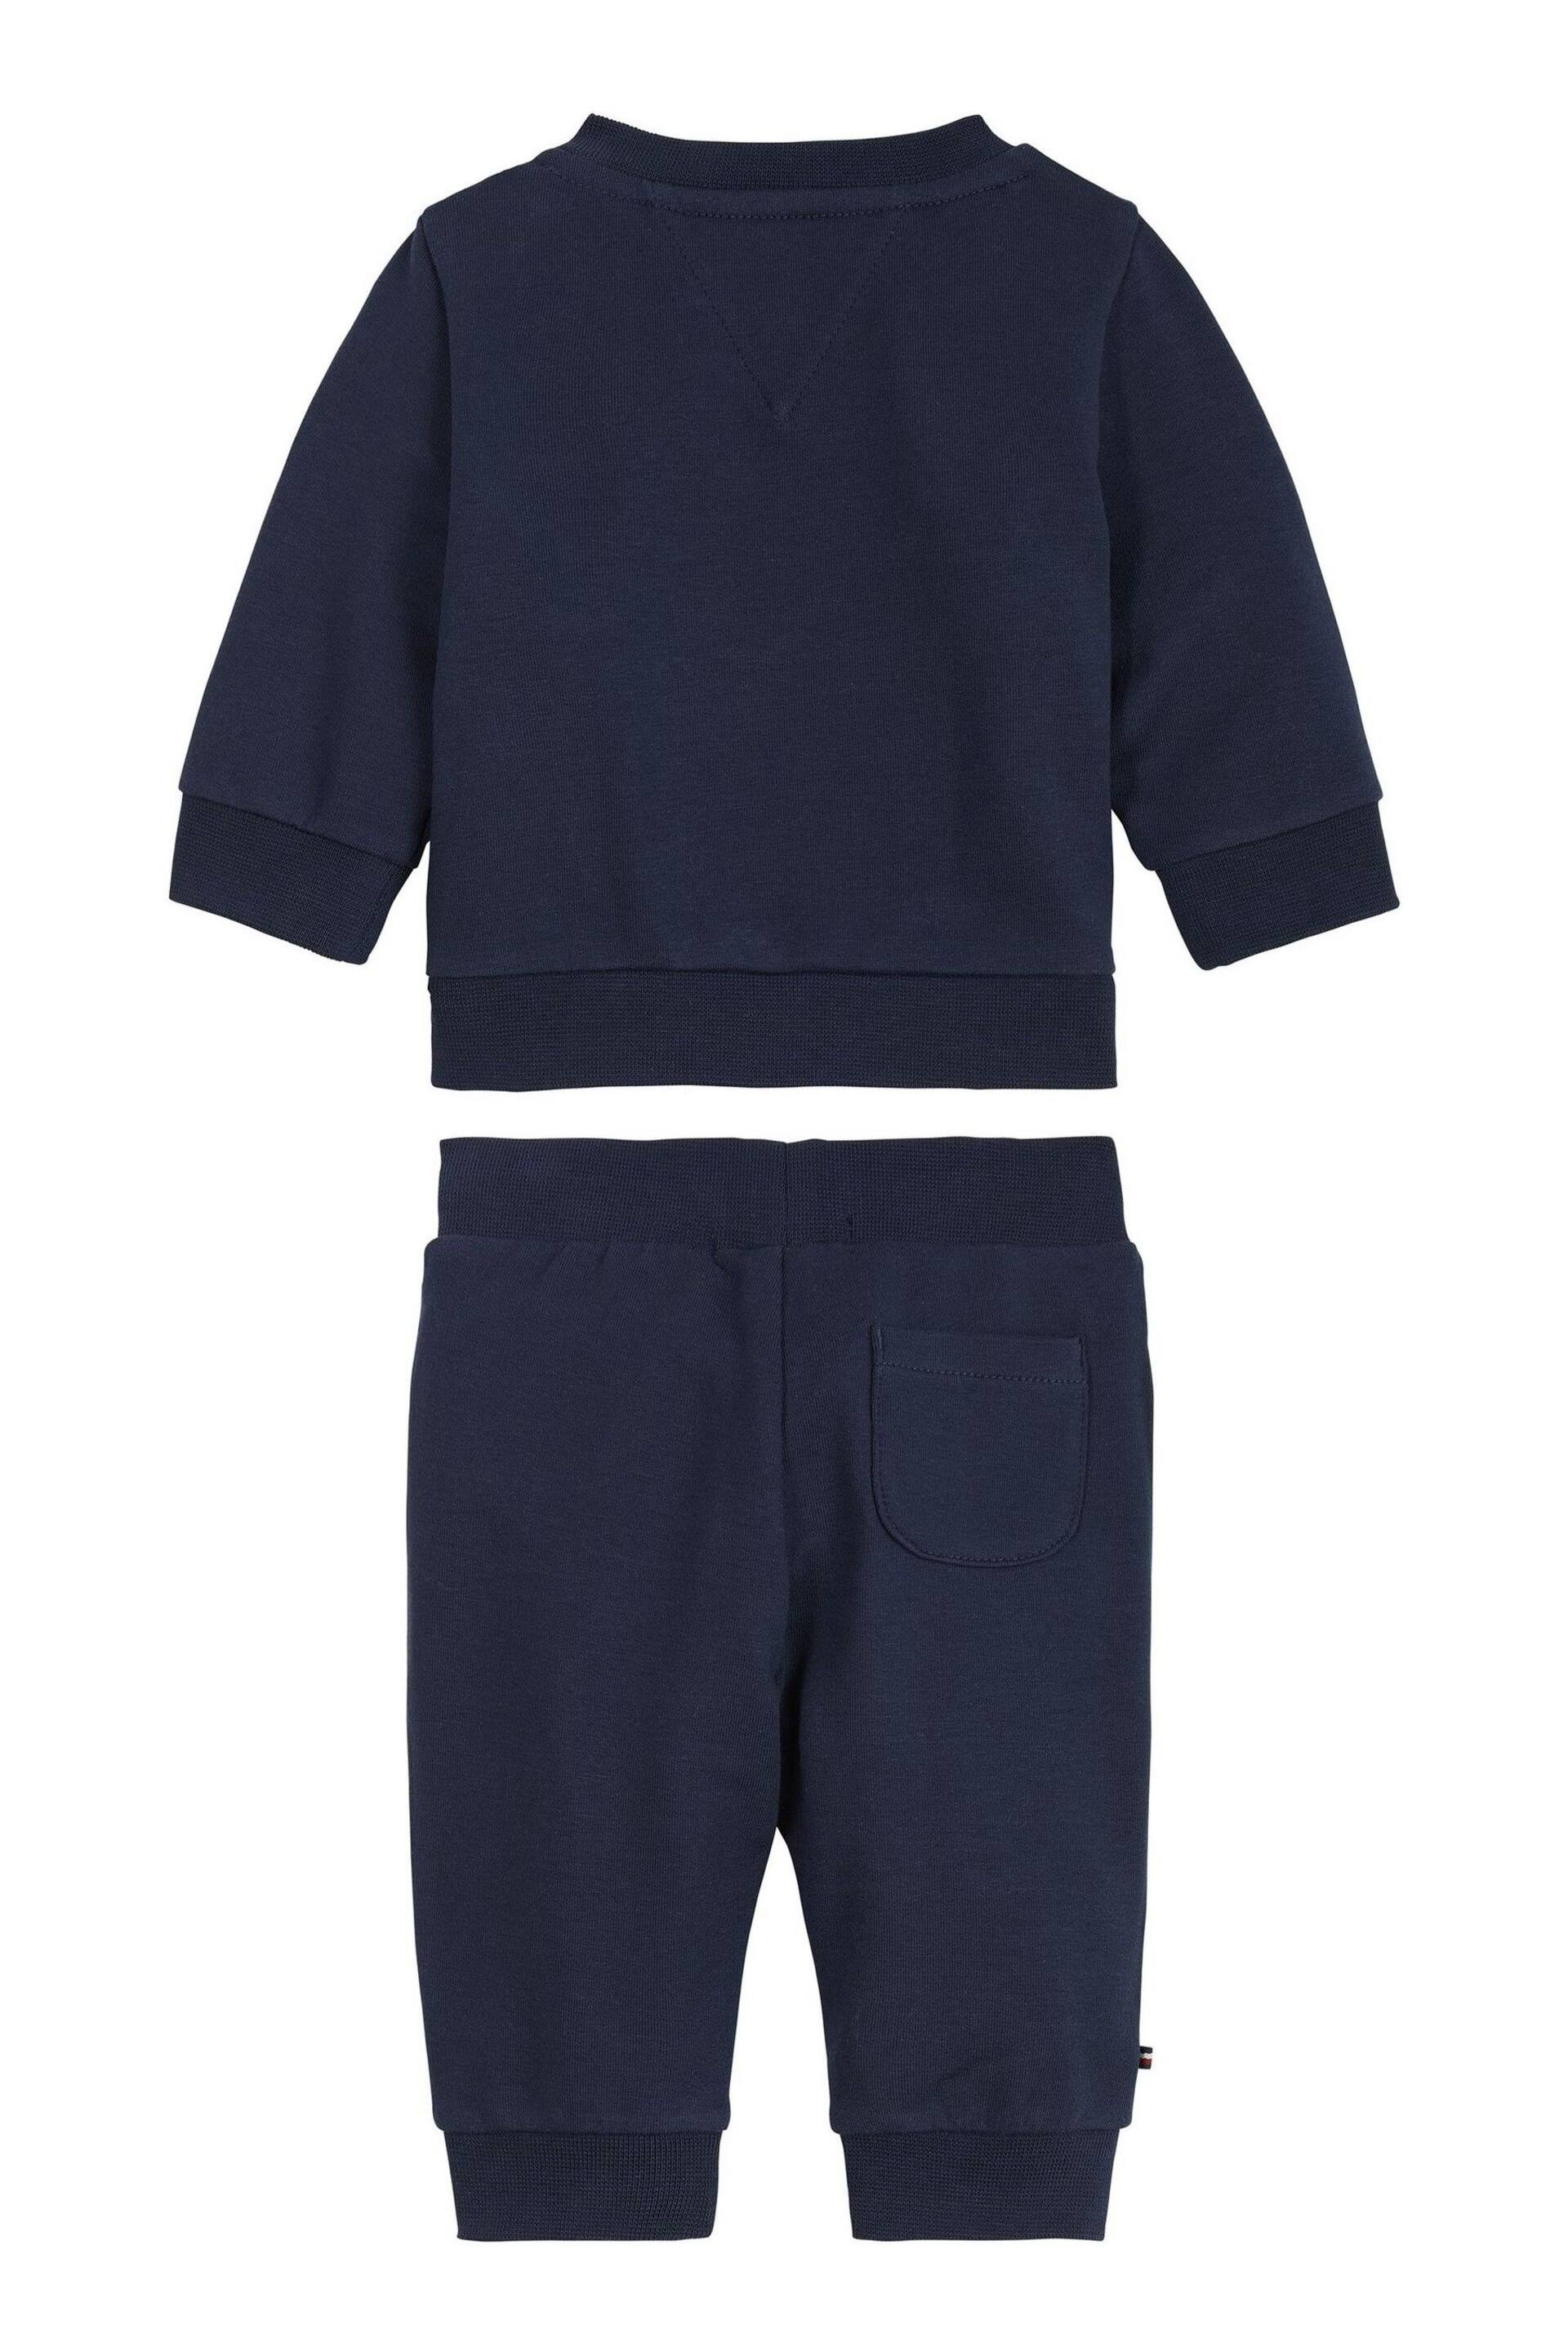 Tommy Hilfiger Baby Blue Essential Two Piece Set - Image 2 of 2